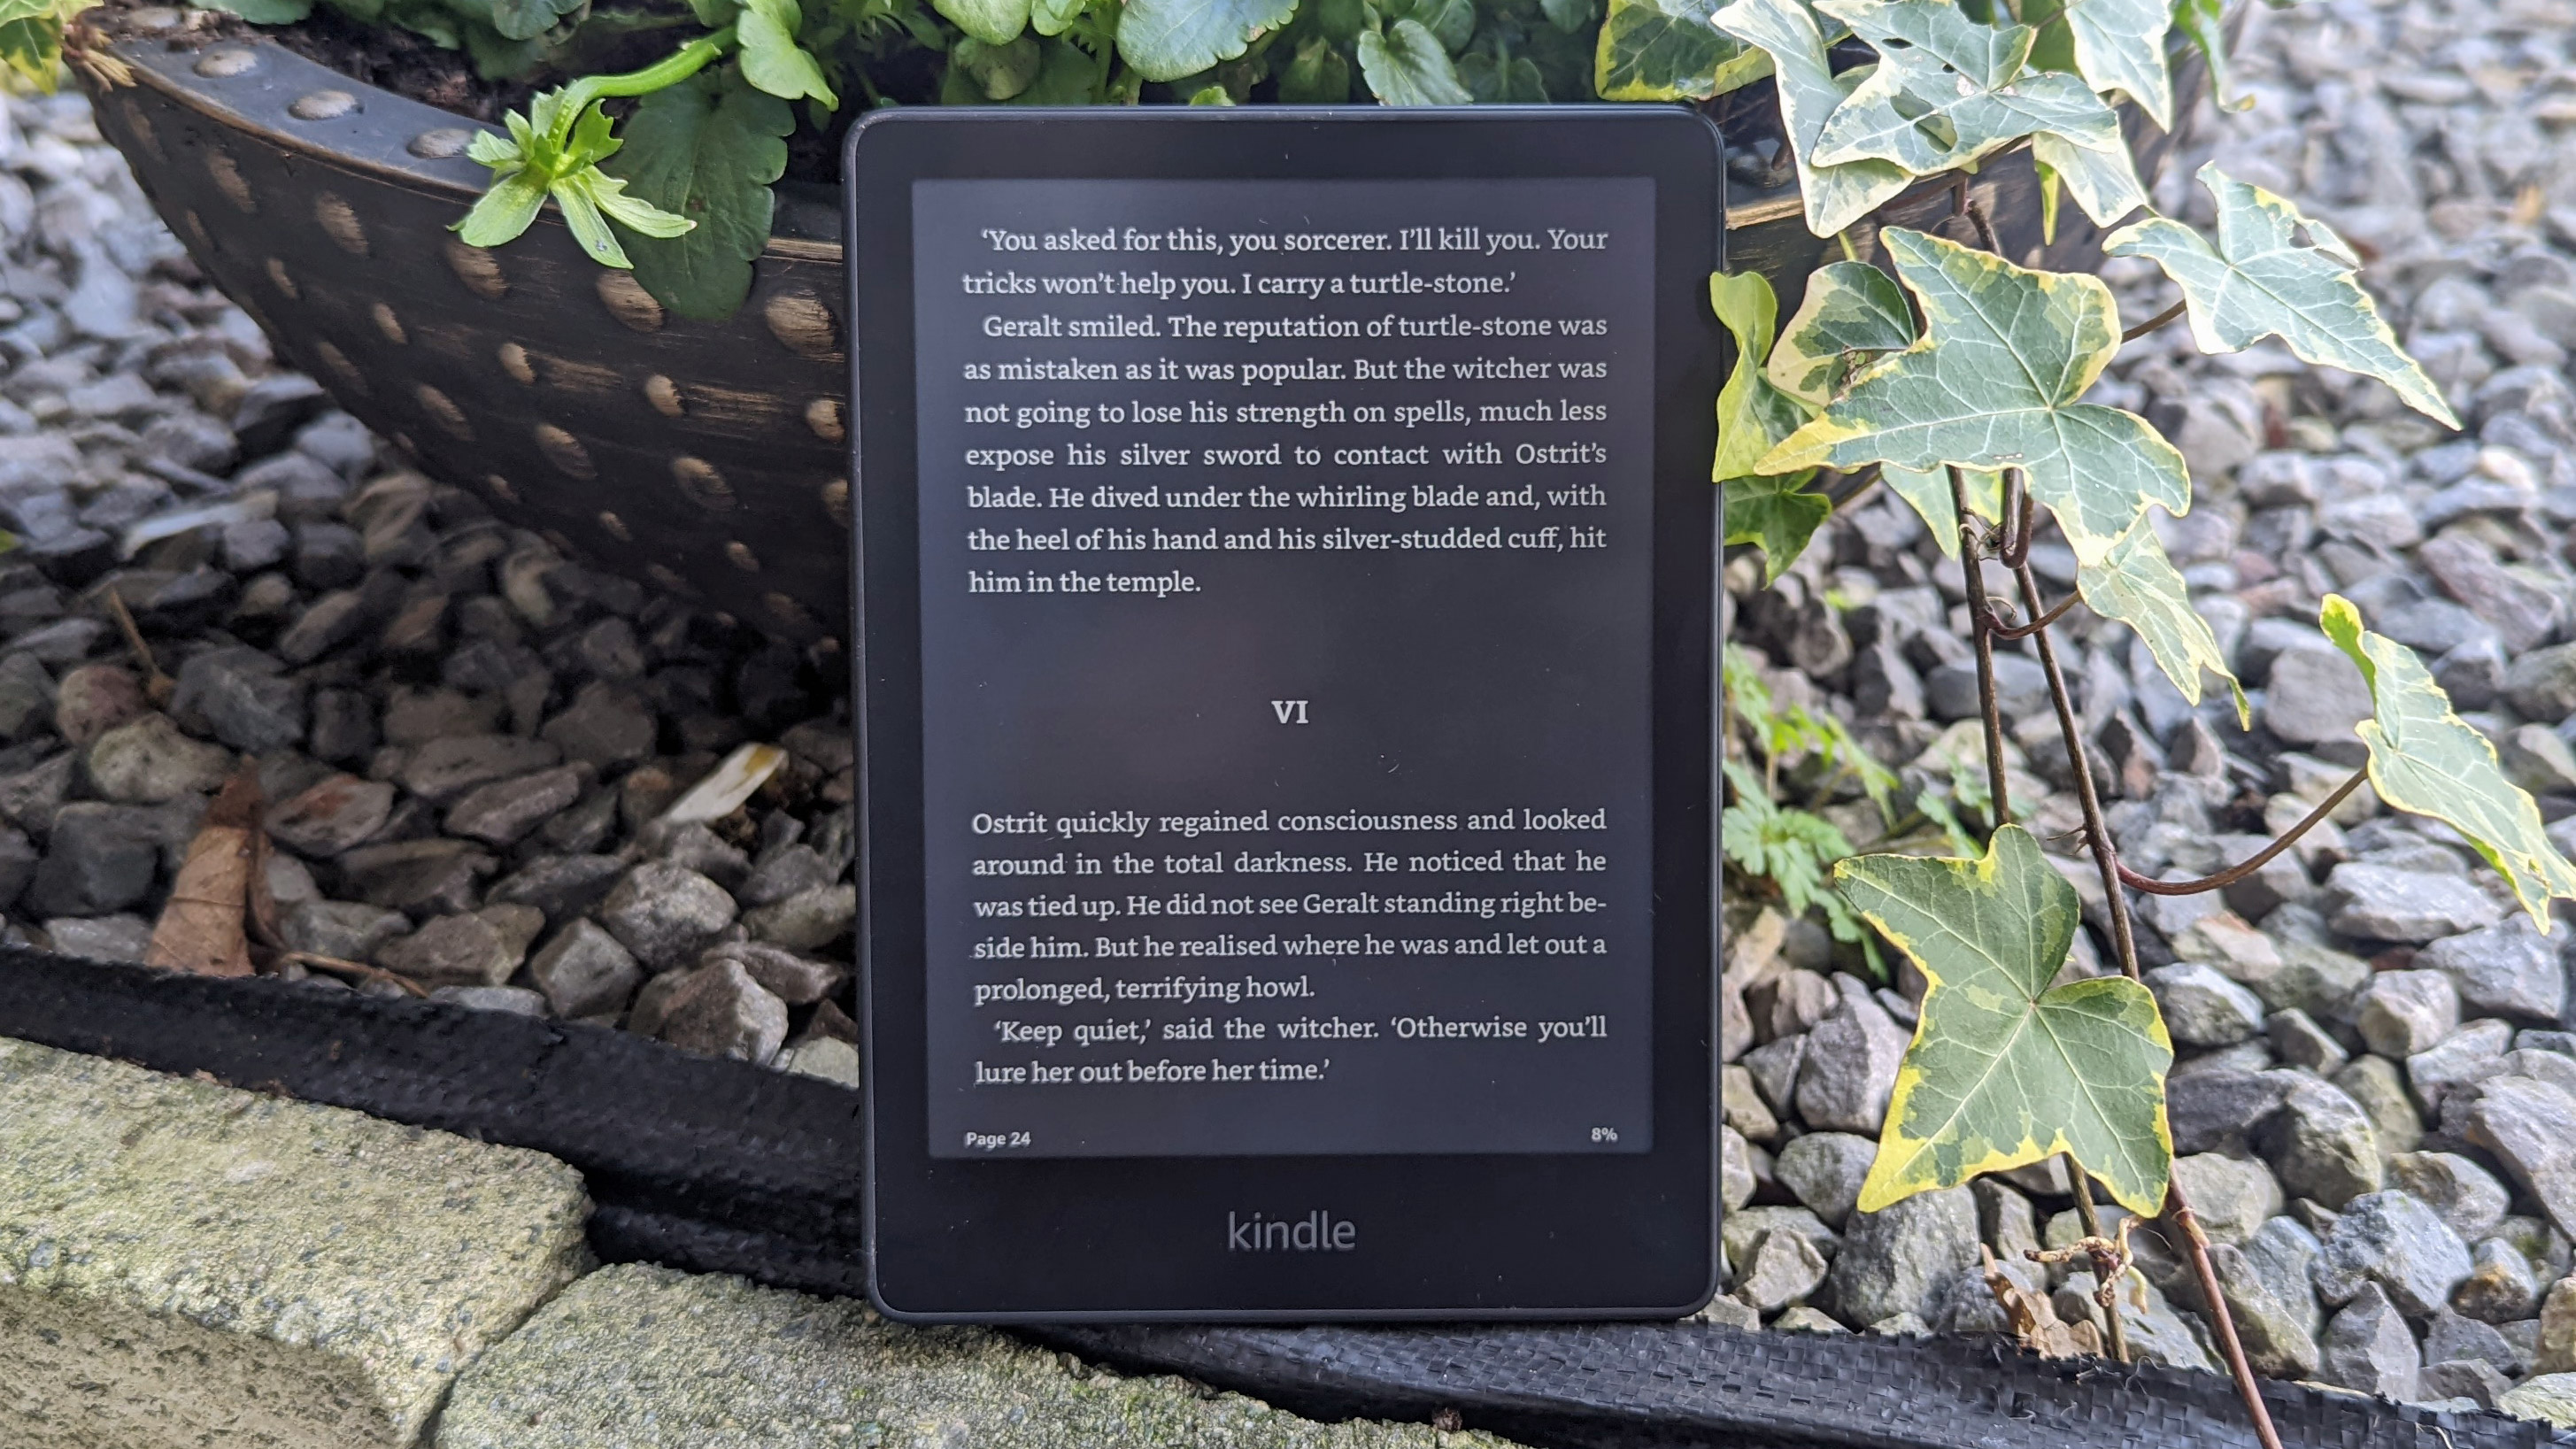 s latest Kindle Paperwhite is already on sale in its new colorways